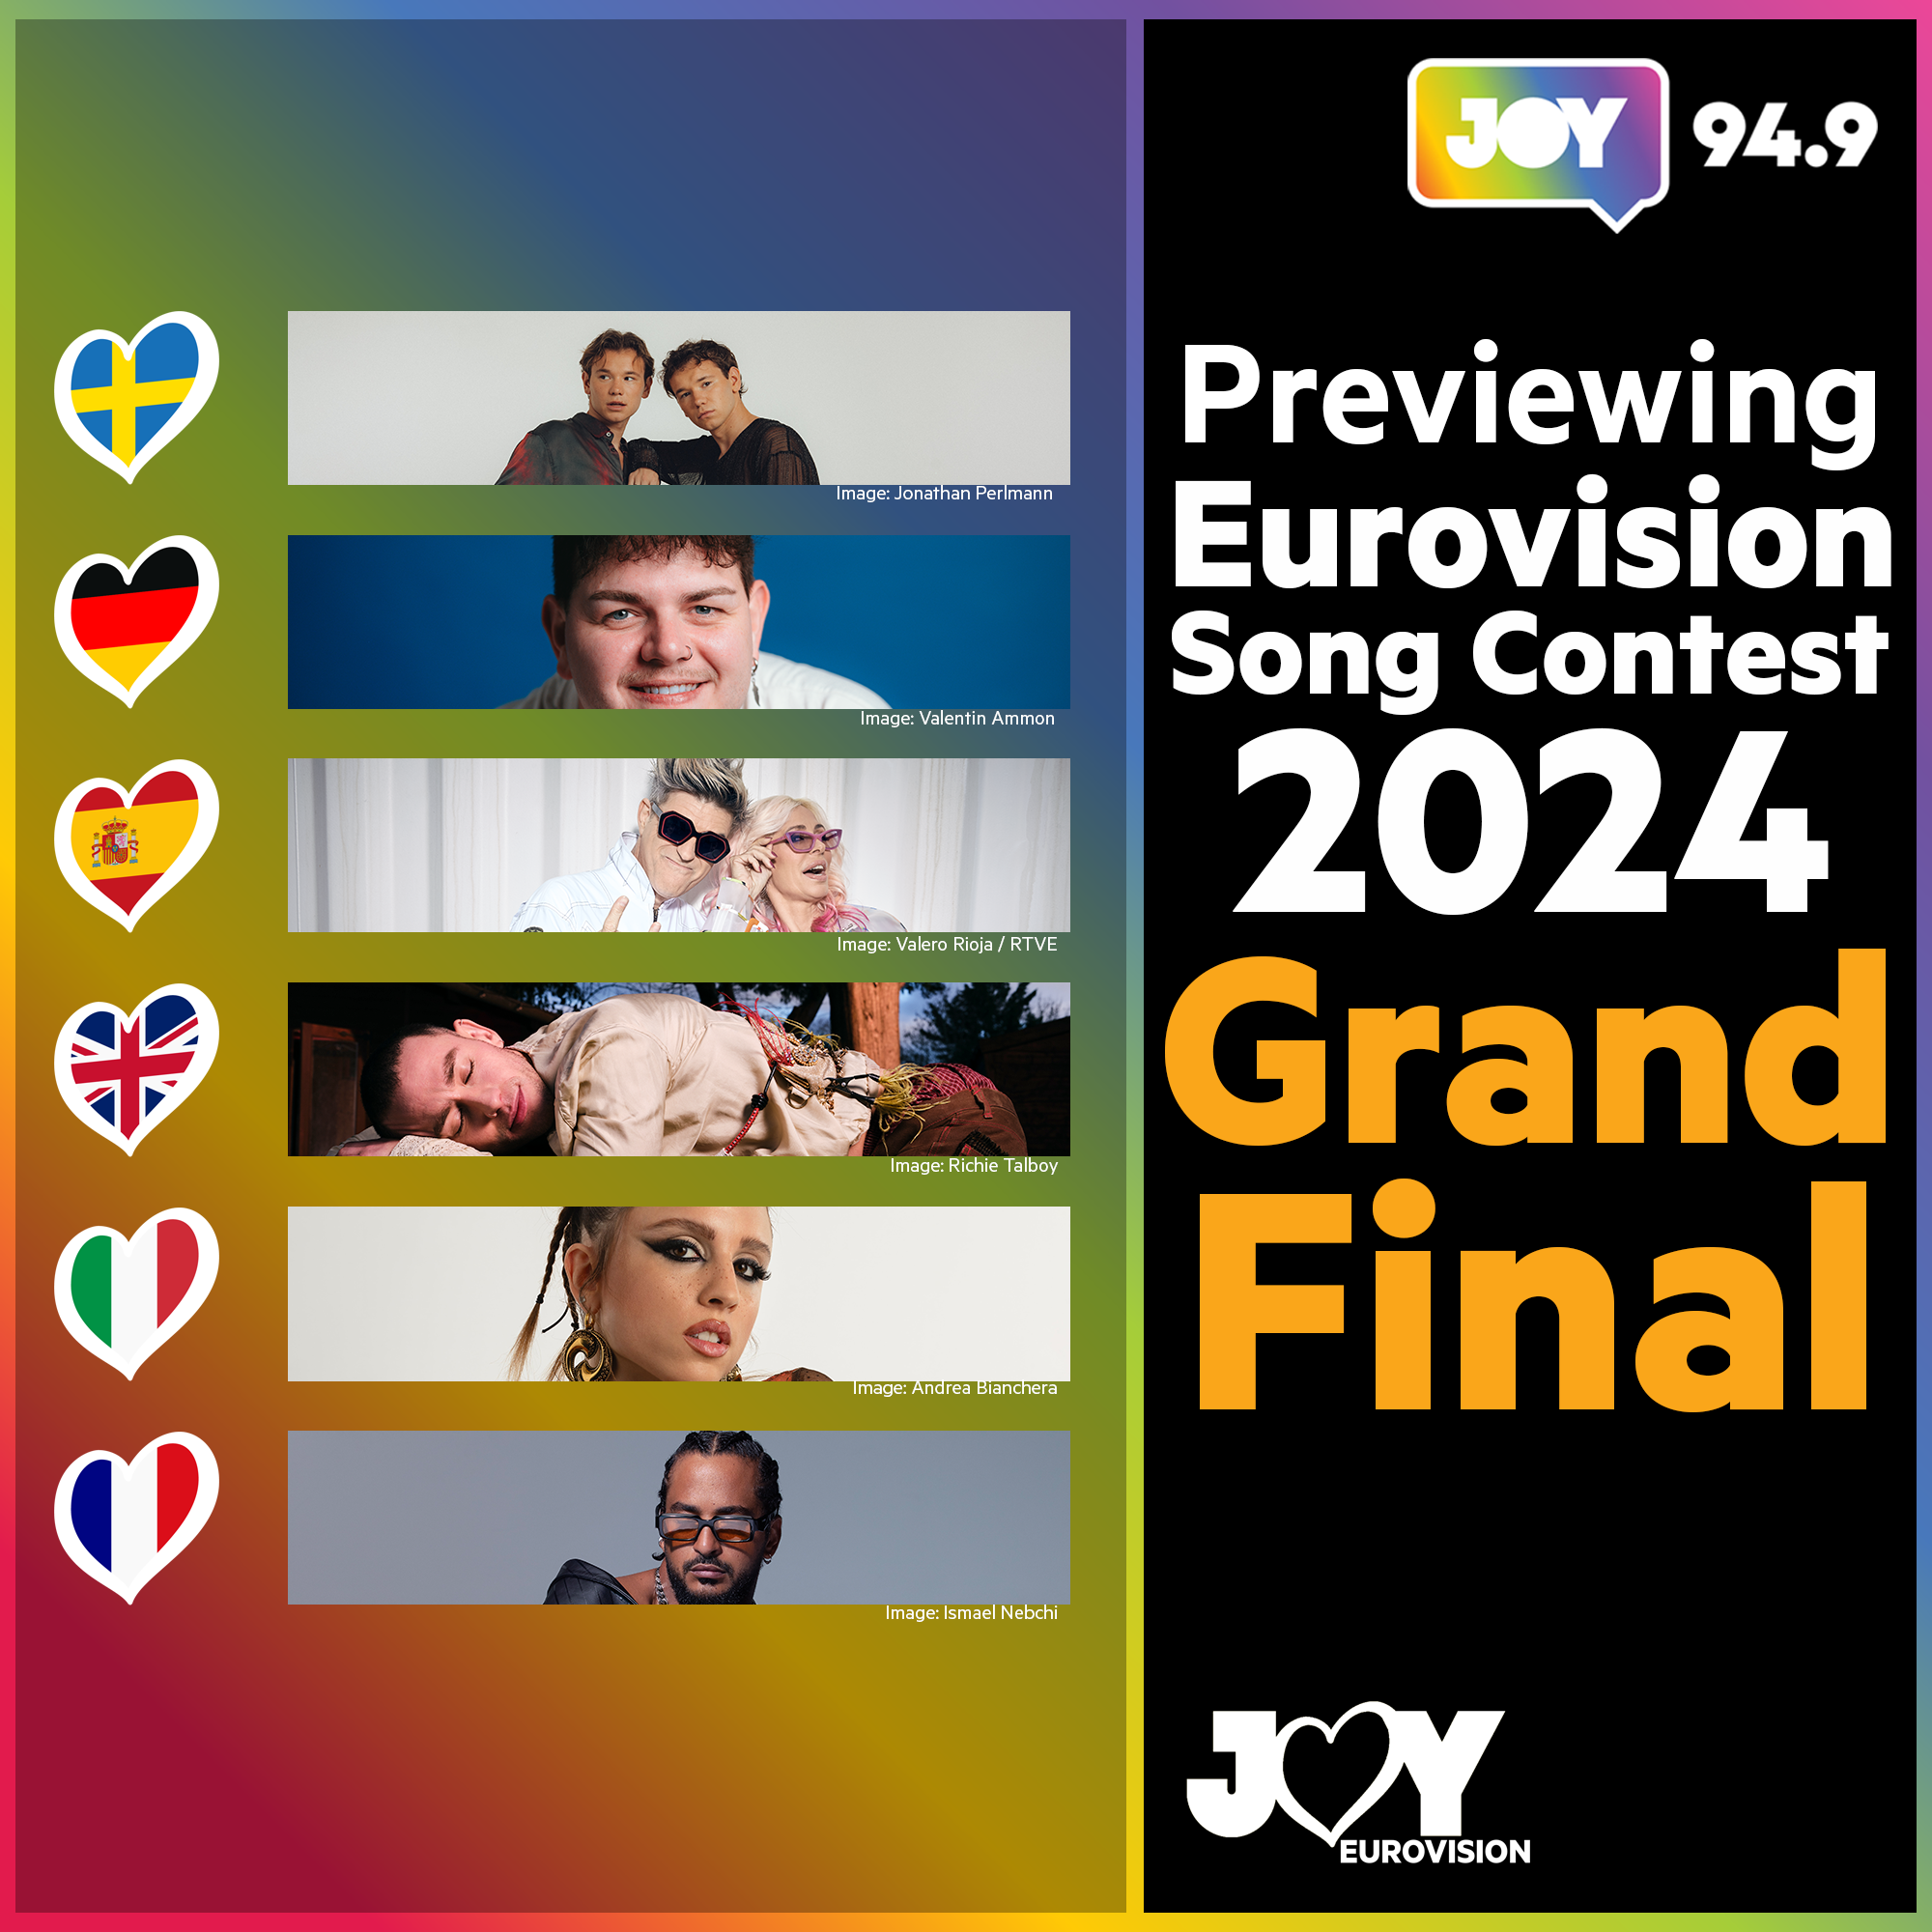 Previewing the Eurovision Song Contest 2024 Grand Final